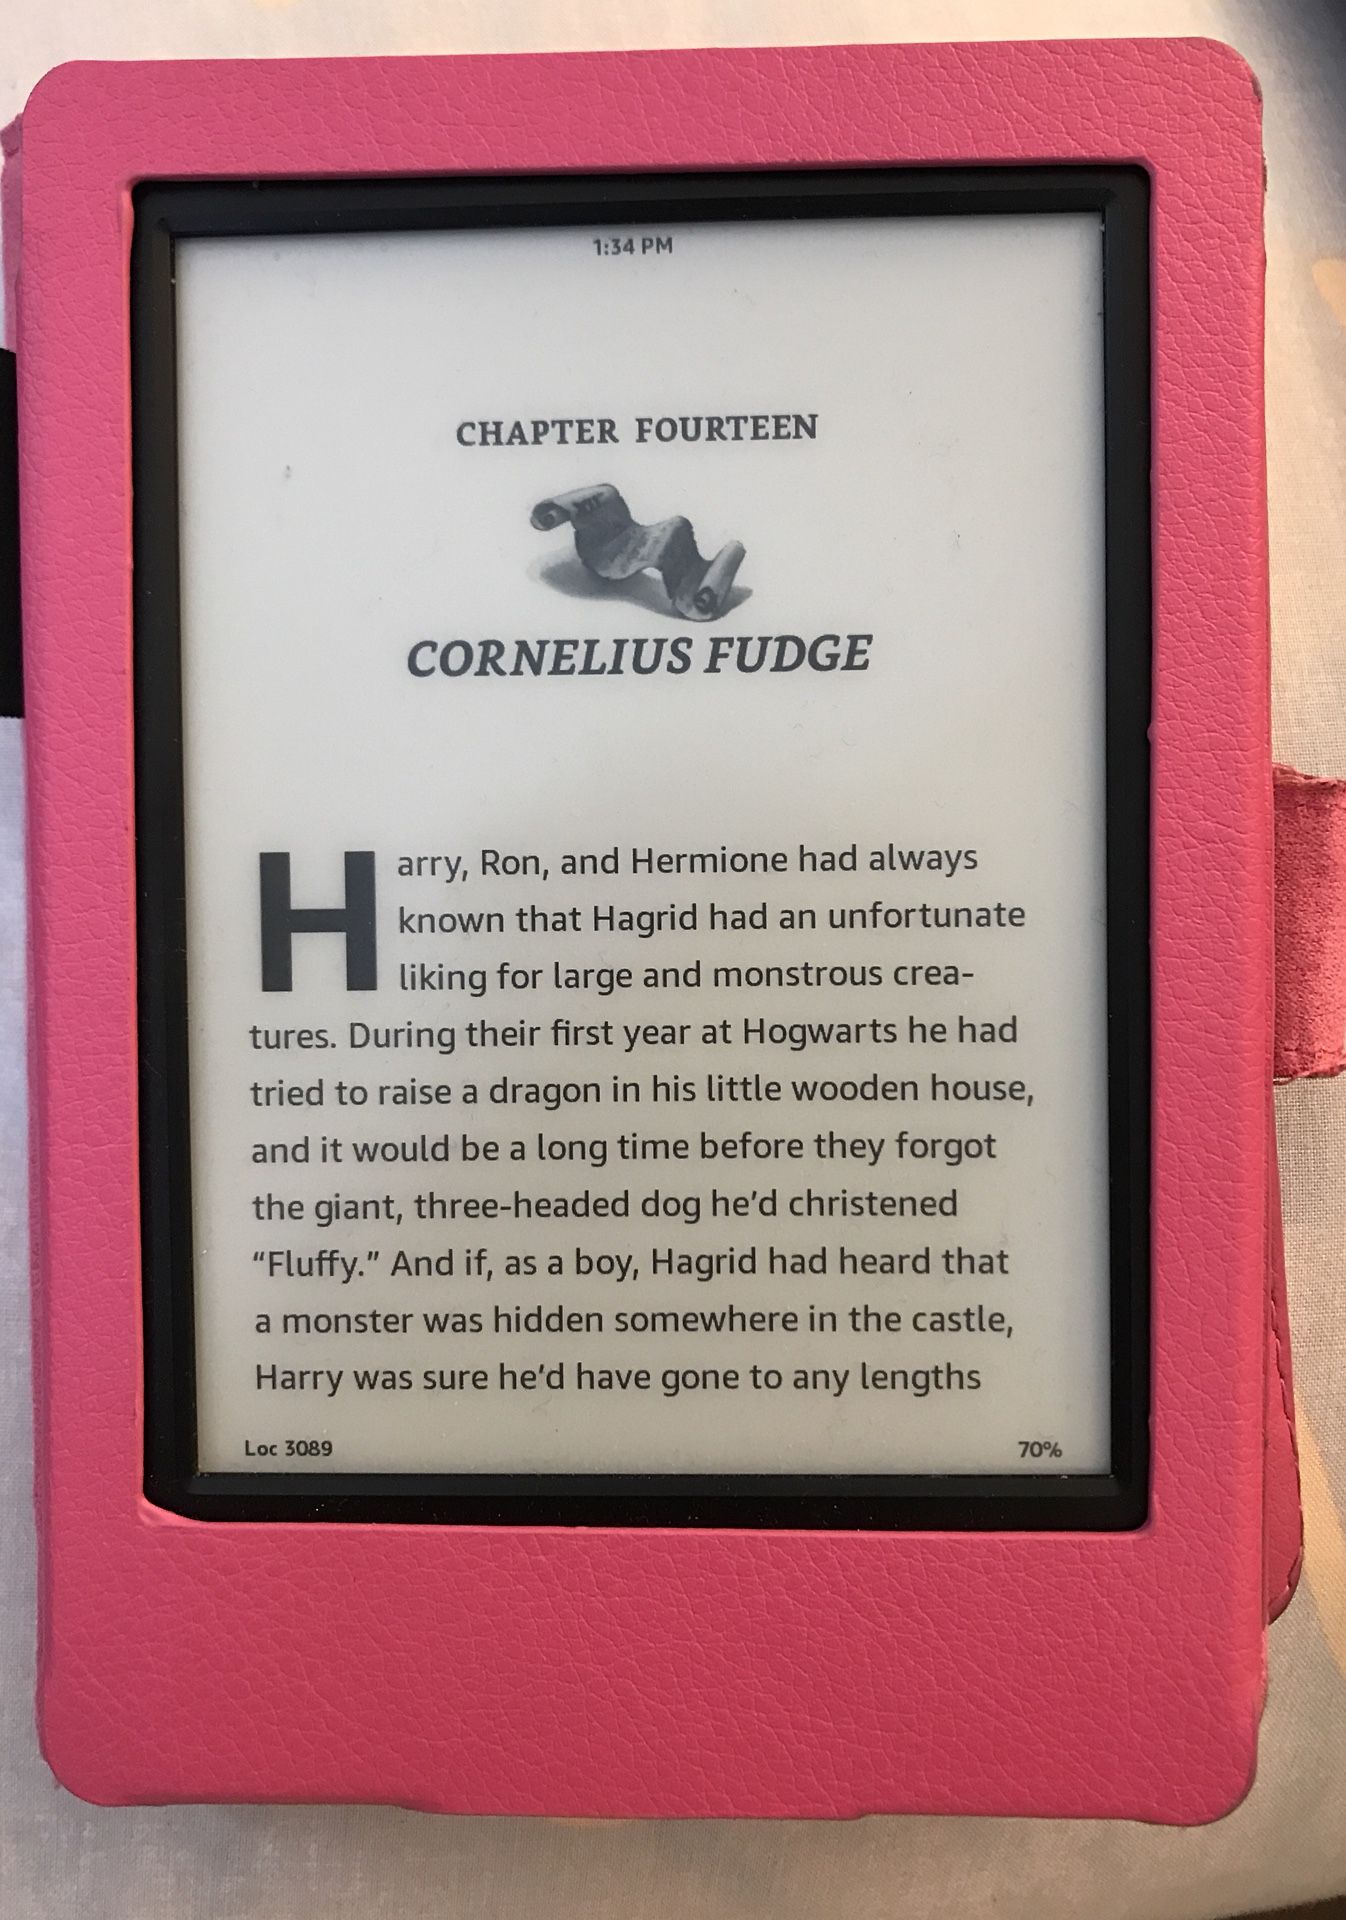 Kindle 7th gen e-reader with case